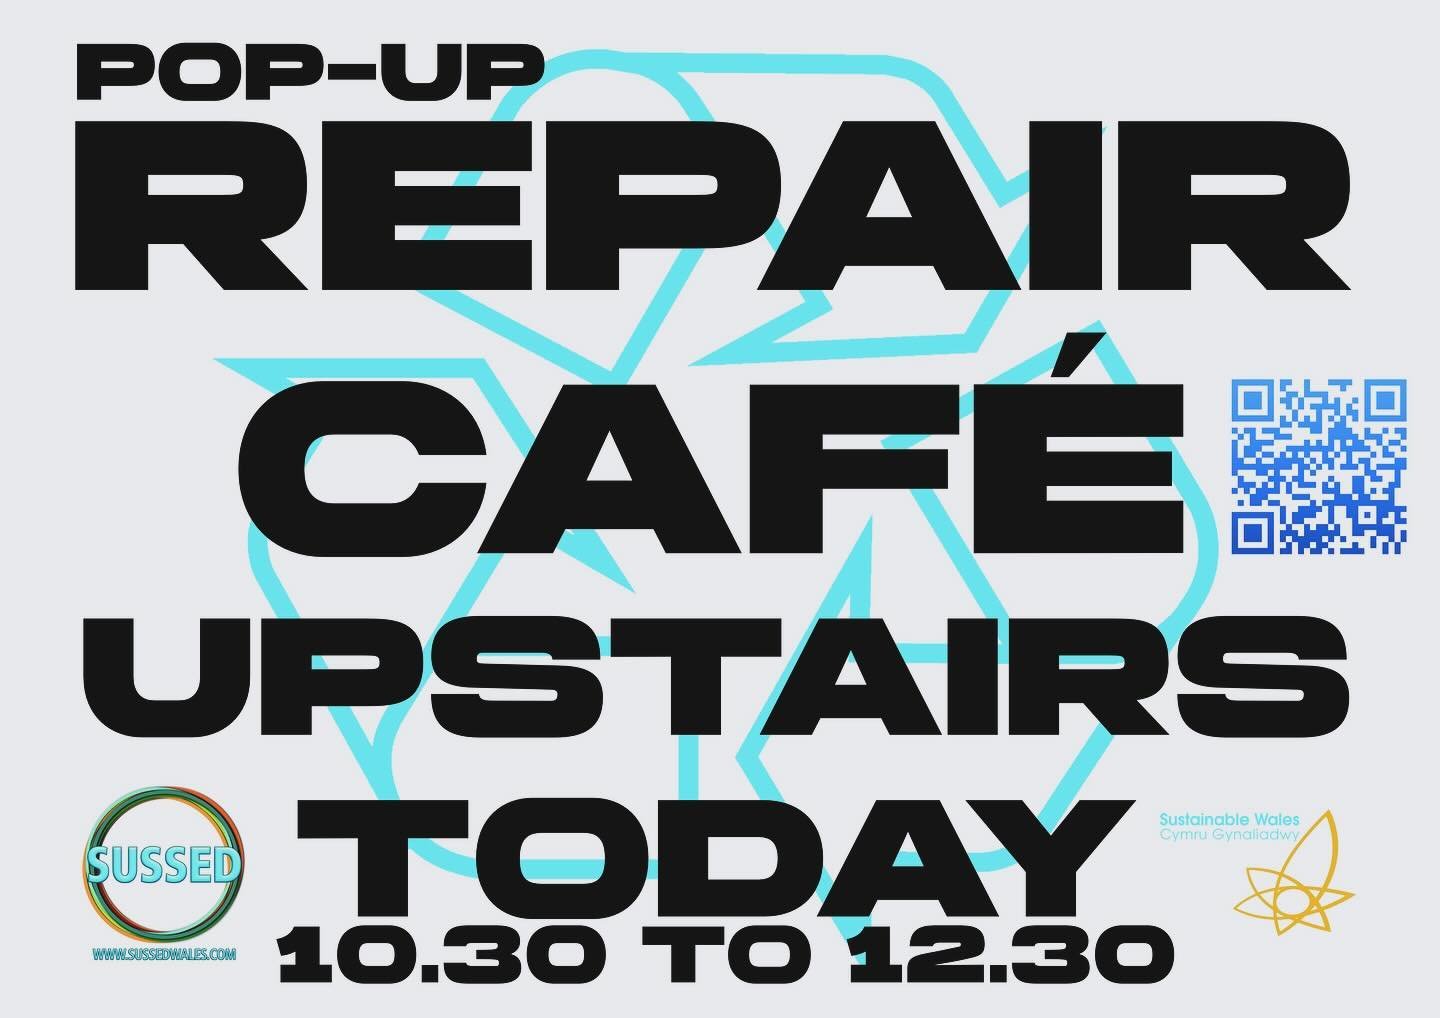 Repair caf&eacute; above SUSSED today 10:30 to 12:30